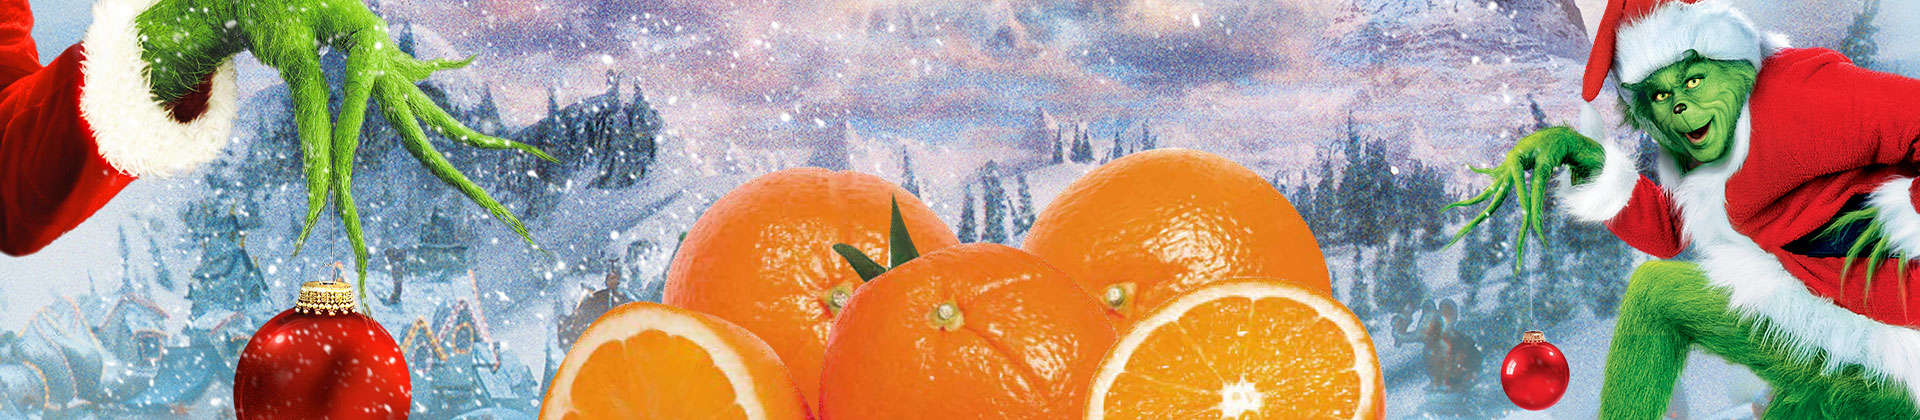 Grinch in a snowy landscape with oranges